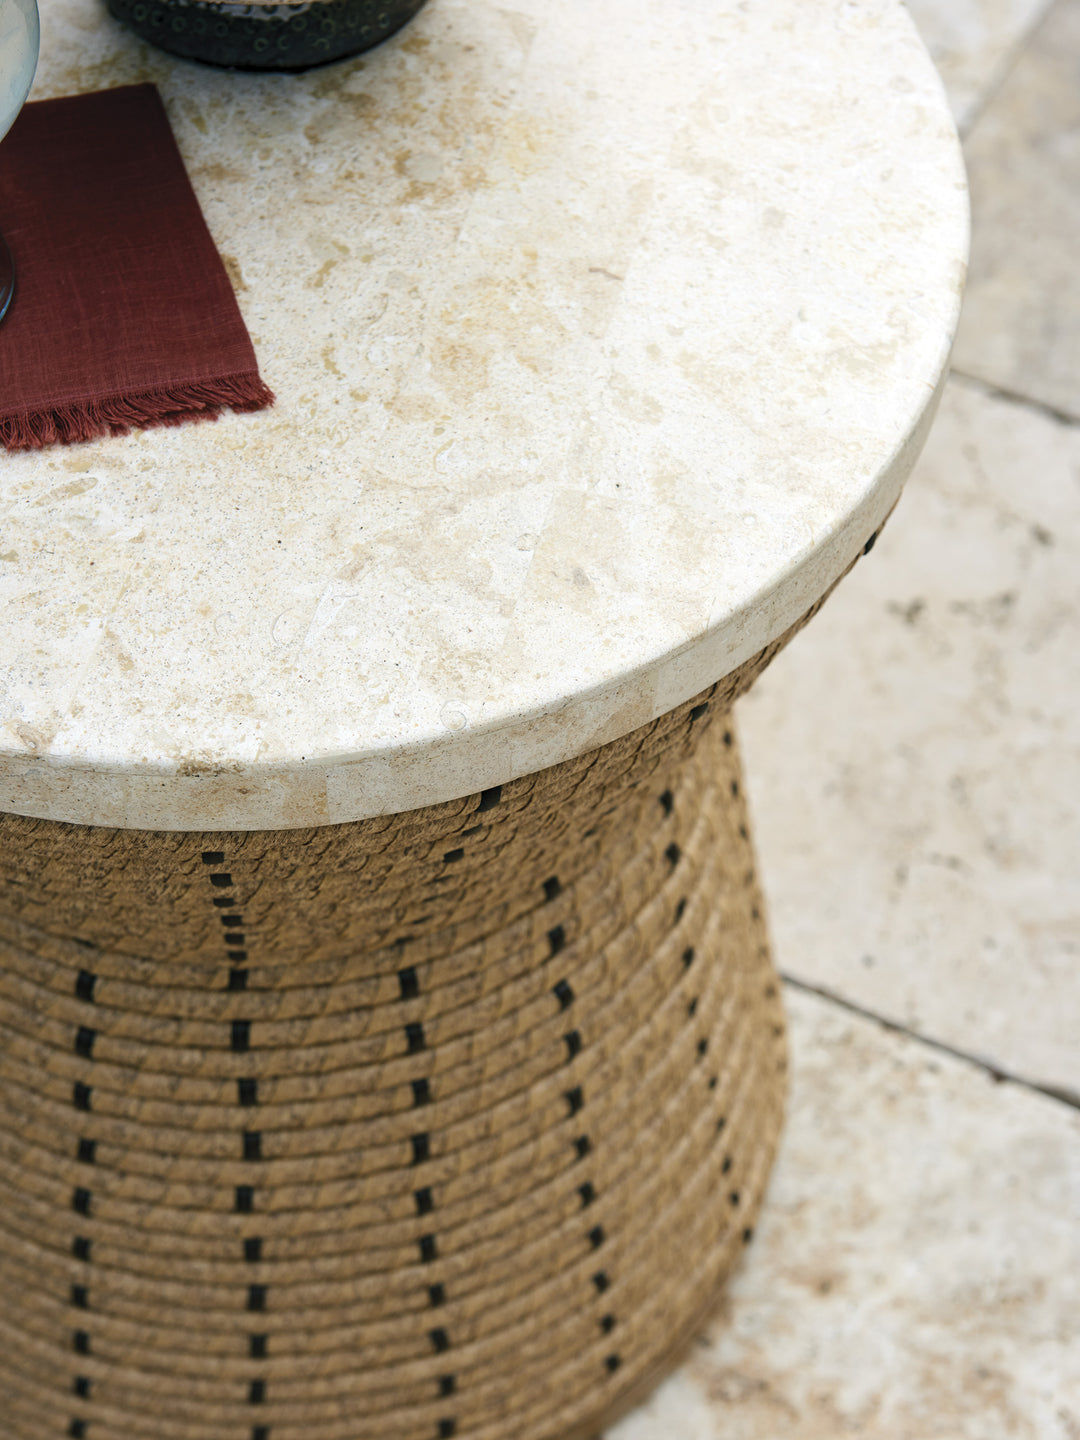 American Home Furniture | Tommy Bahama Outdoor  - Valley View Round Side Table